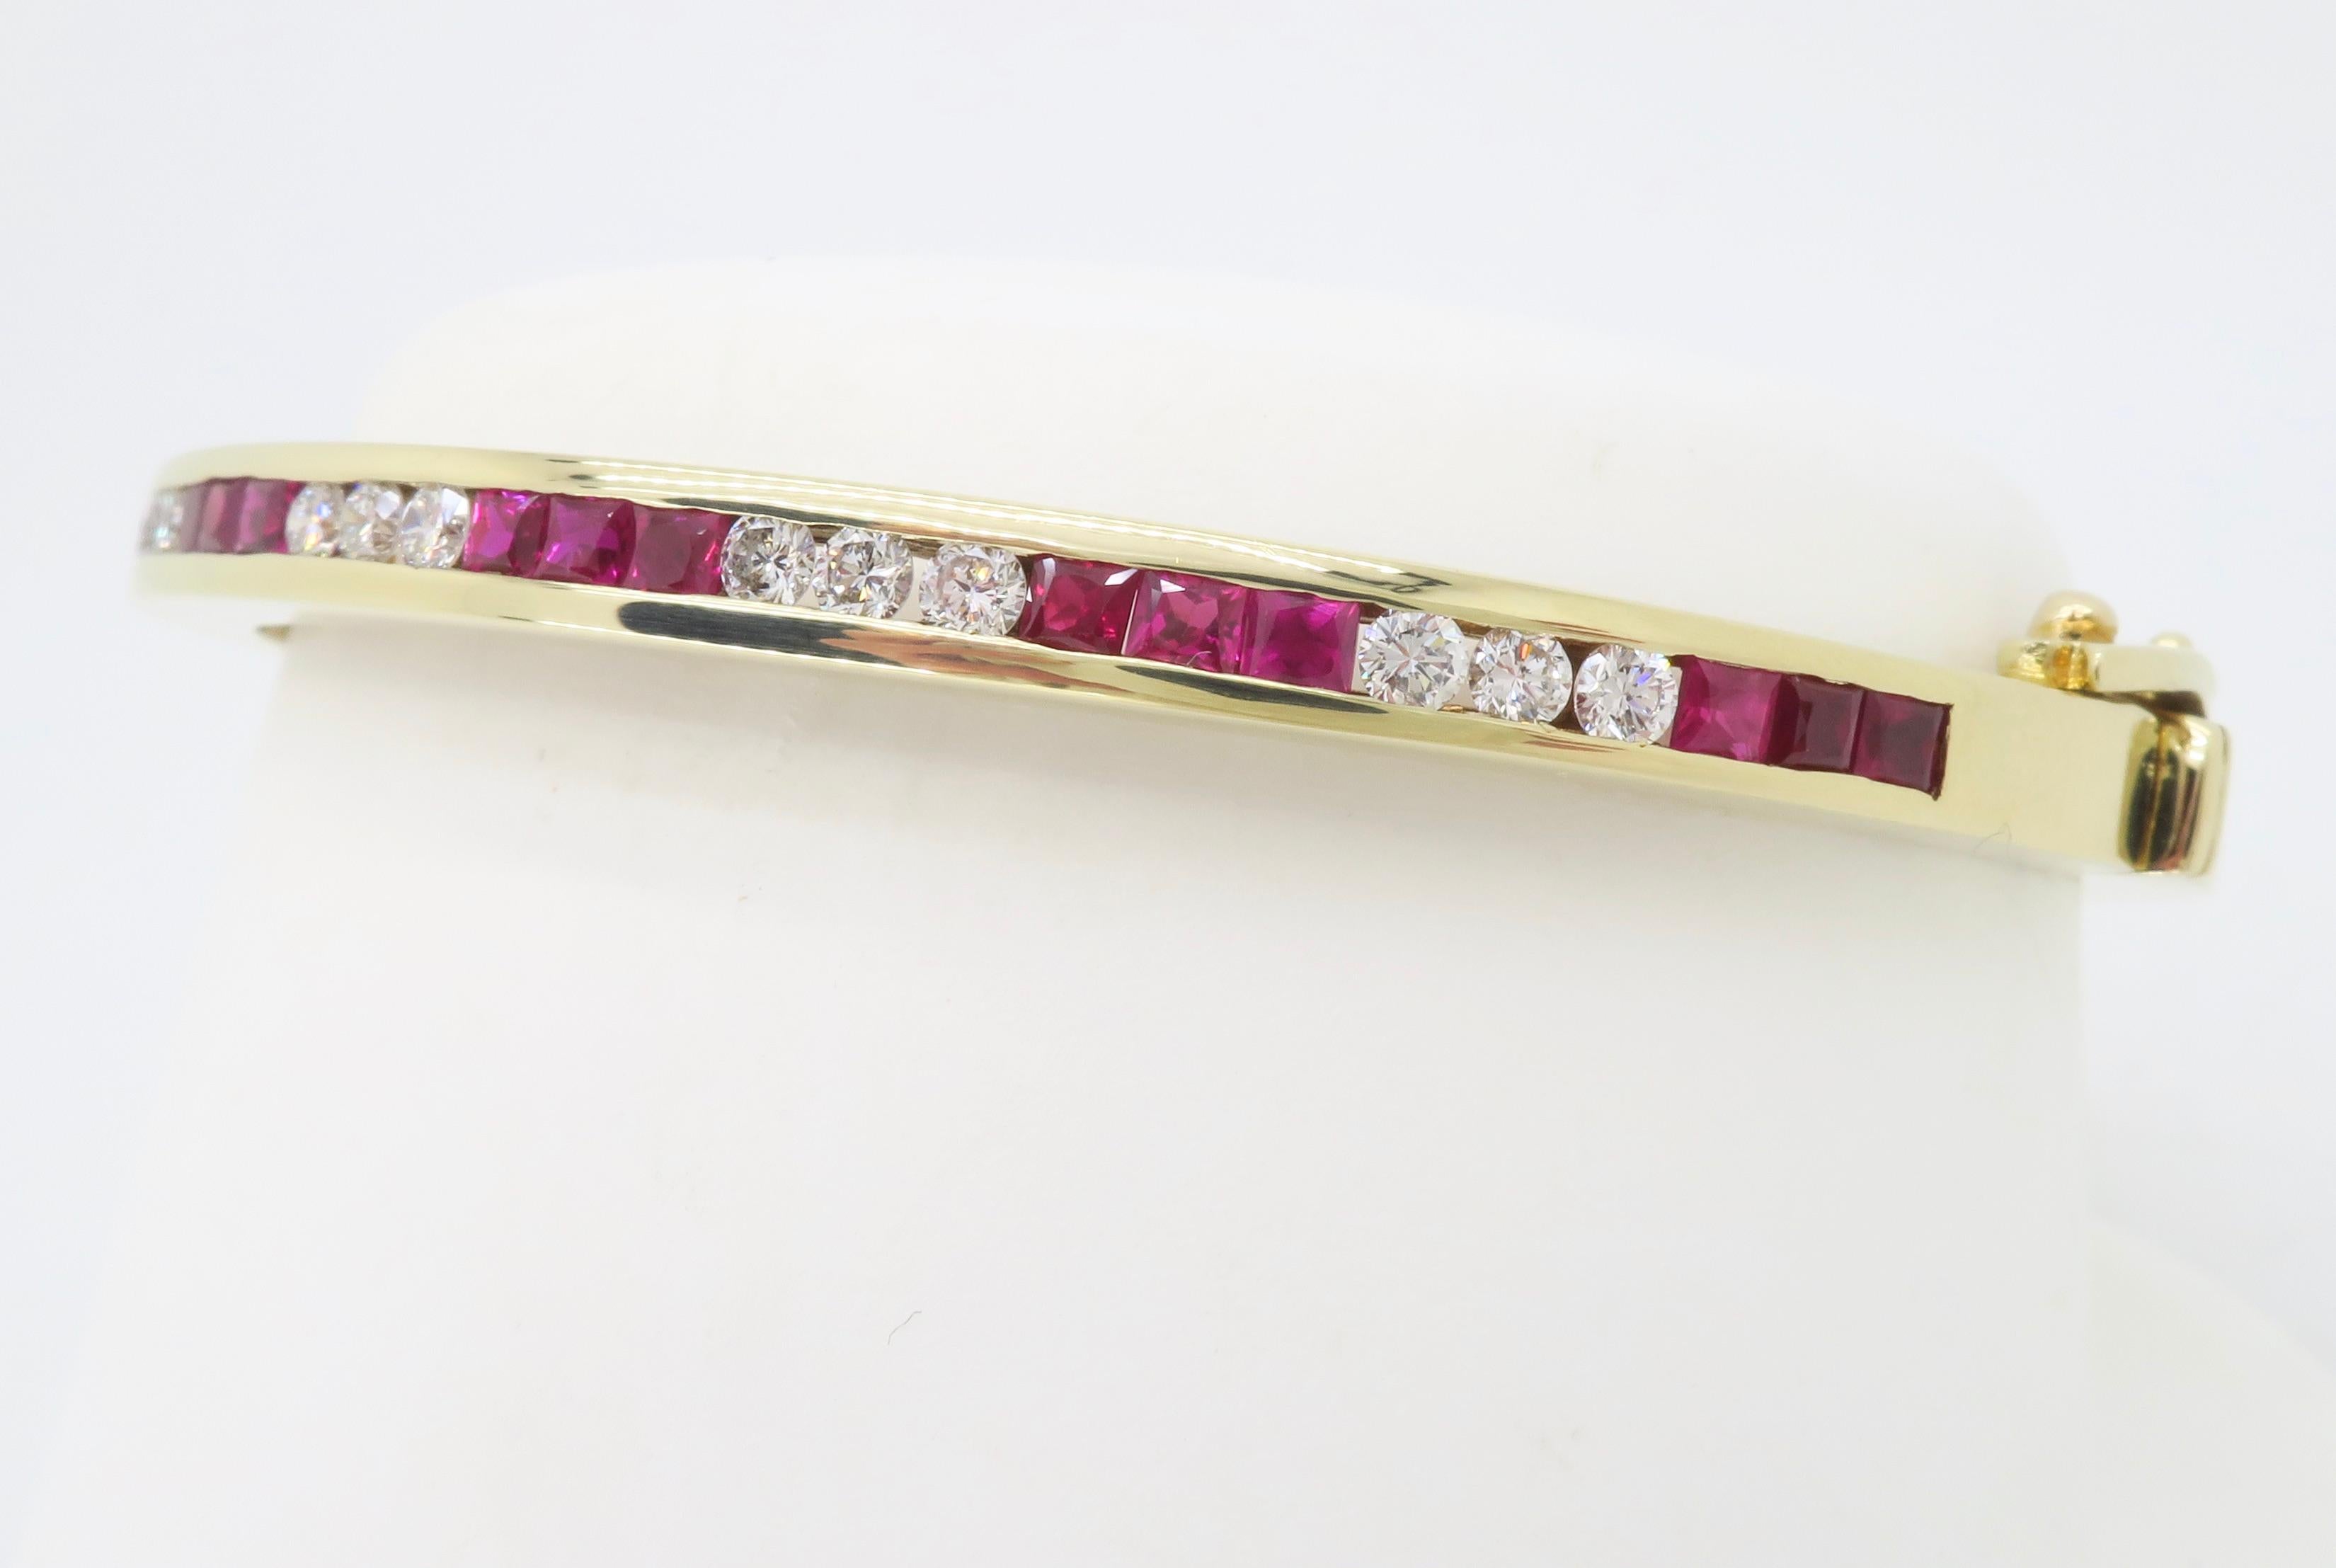 Channel set diamond and ruby bangle bracelet crafted in 14k yellow gold.

Gemstone: Diamond and Ruby
Gemstone Weight: Approximately 1.41CTW
Diamond Carat Weight: Approximately .61CTW
Diamond Cut: Round Brilliant cut Diamonds / Princess Cut Rubies